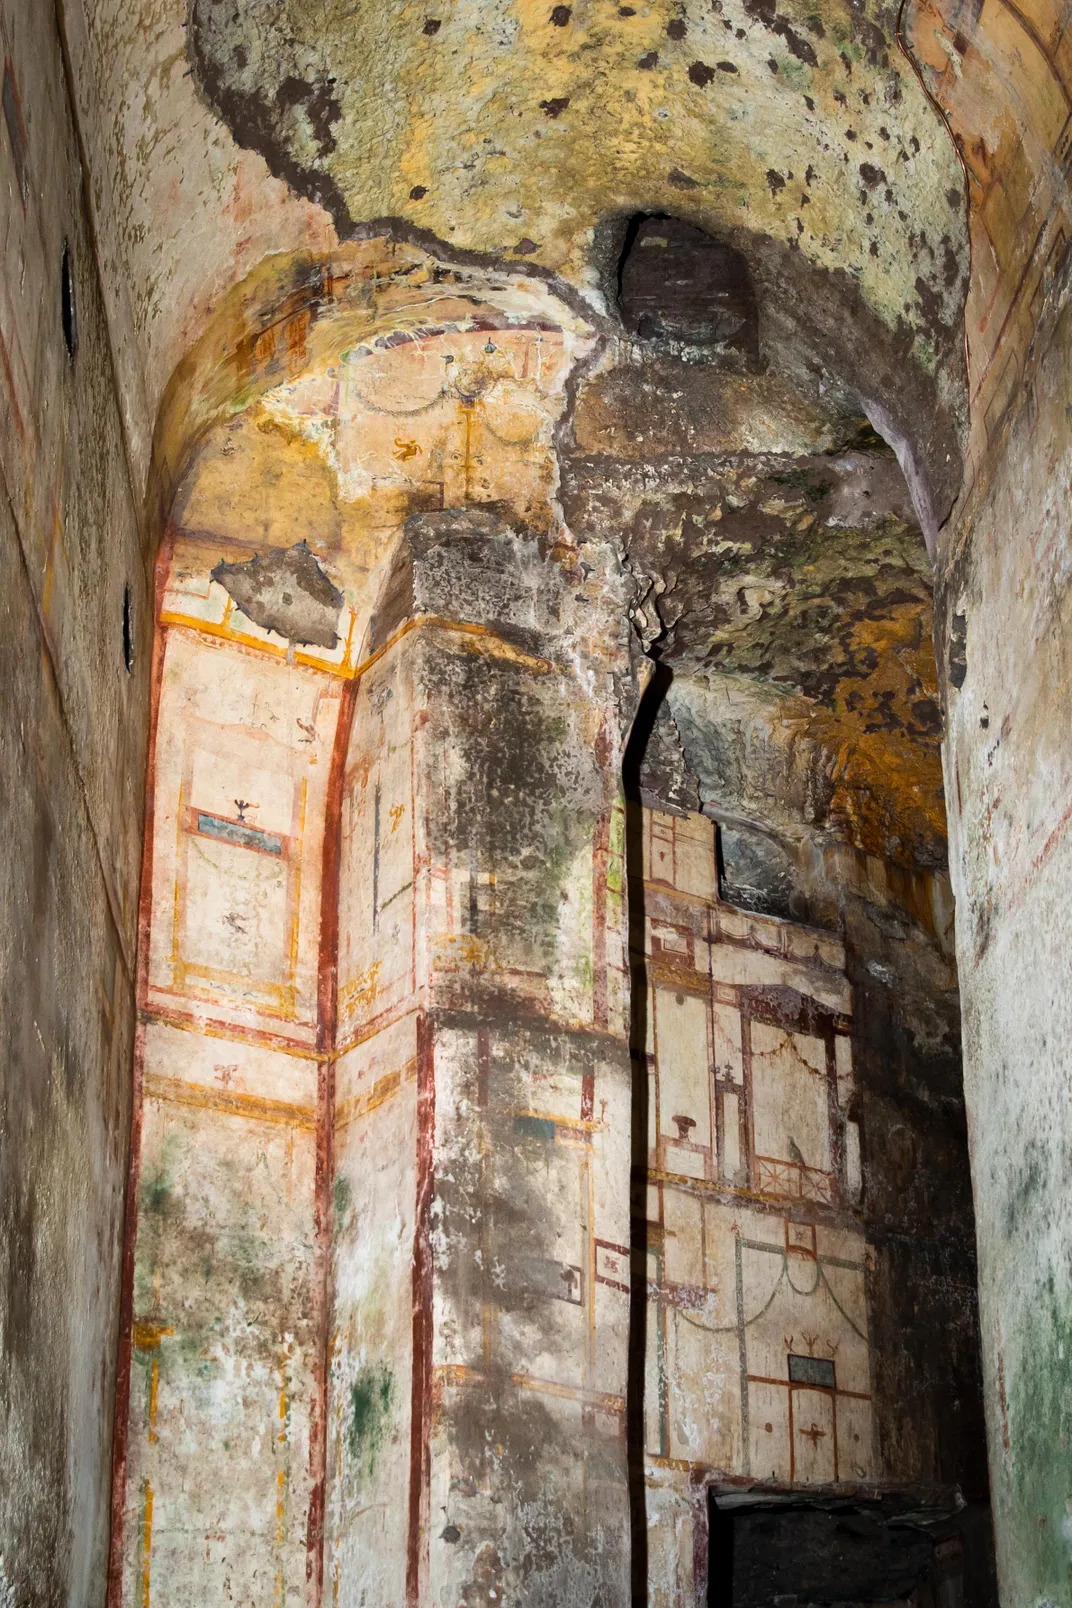 A frescoed gallery at the Domus Aurea